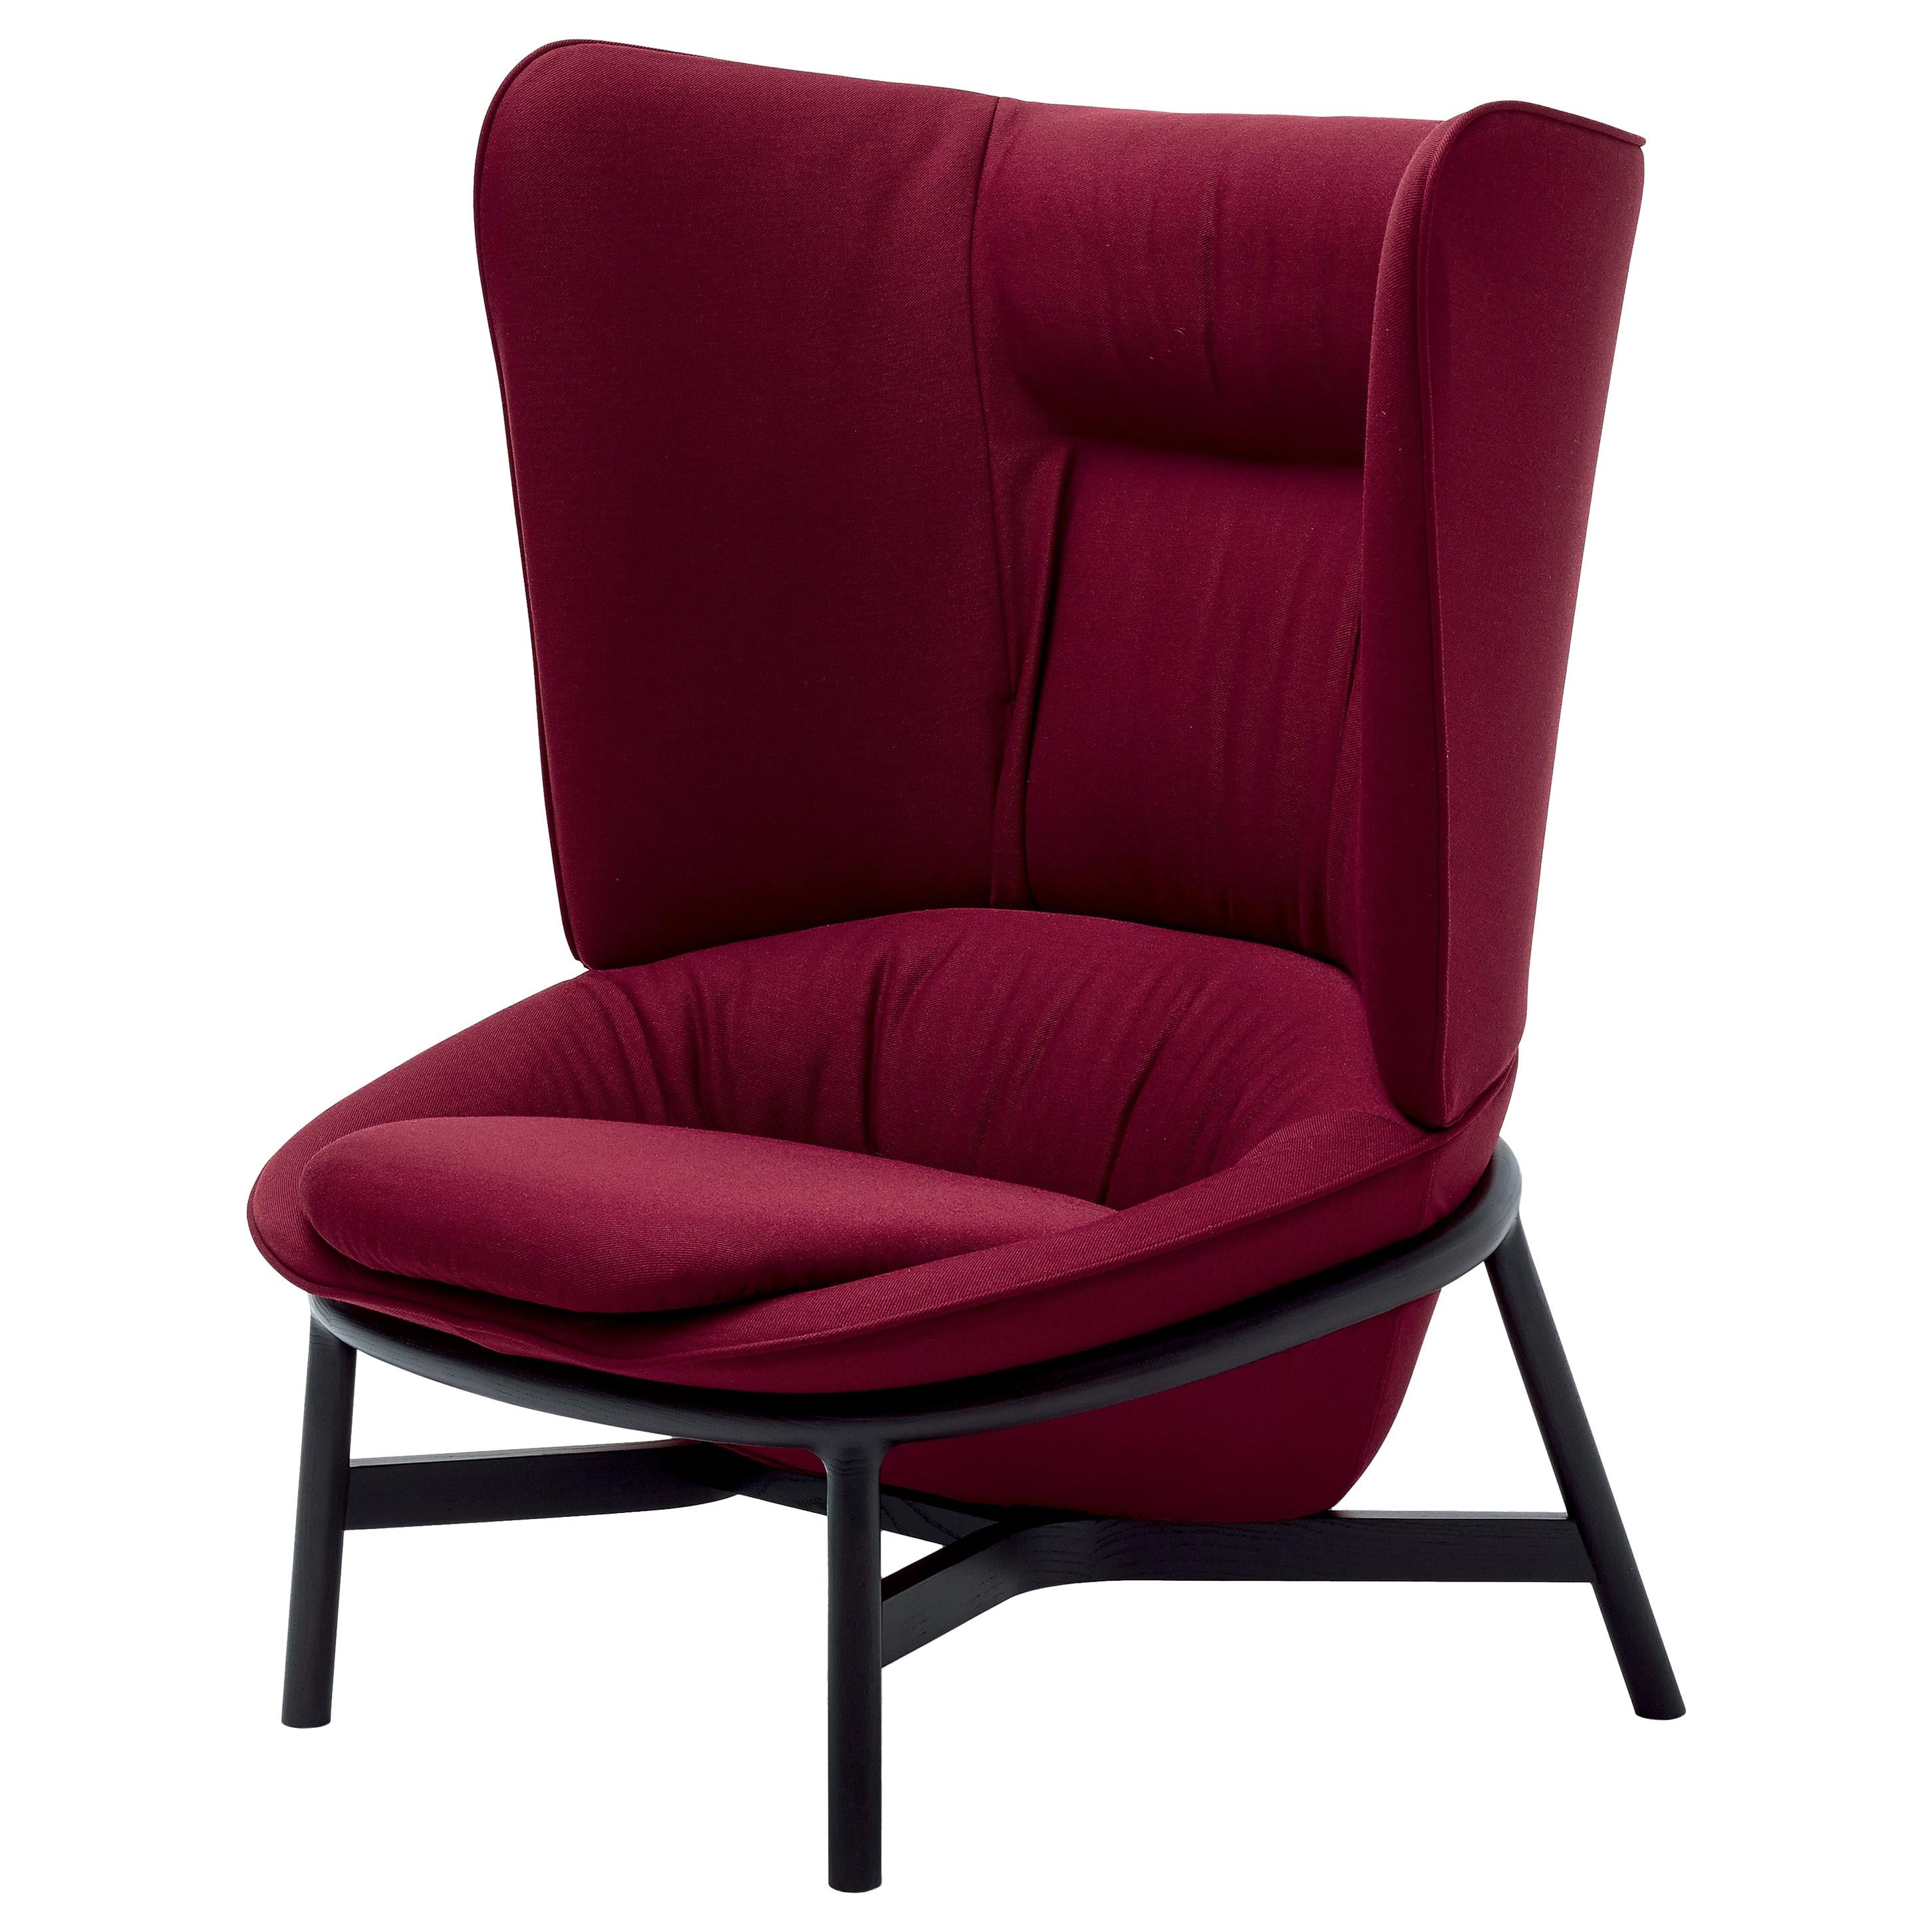 Arflex Ladle Armchair with High Backrest in Red Etoile Fabric by Luca Nichetto